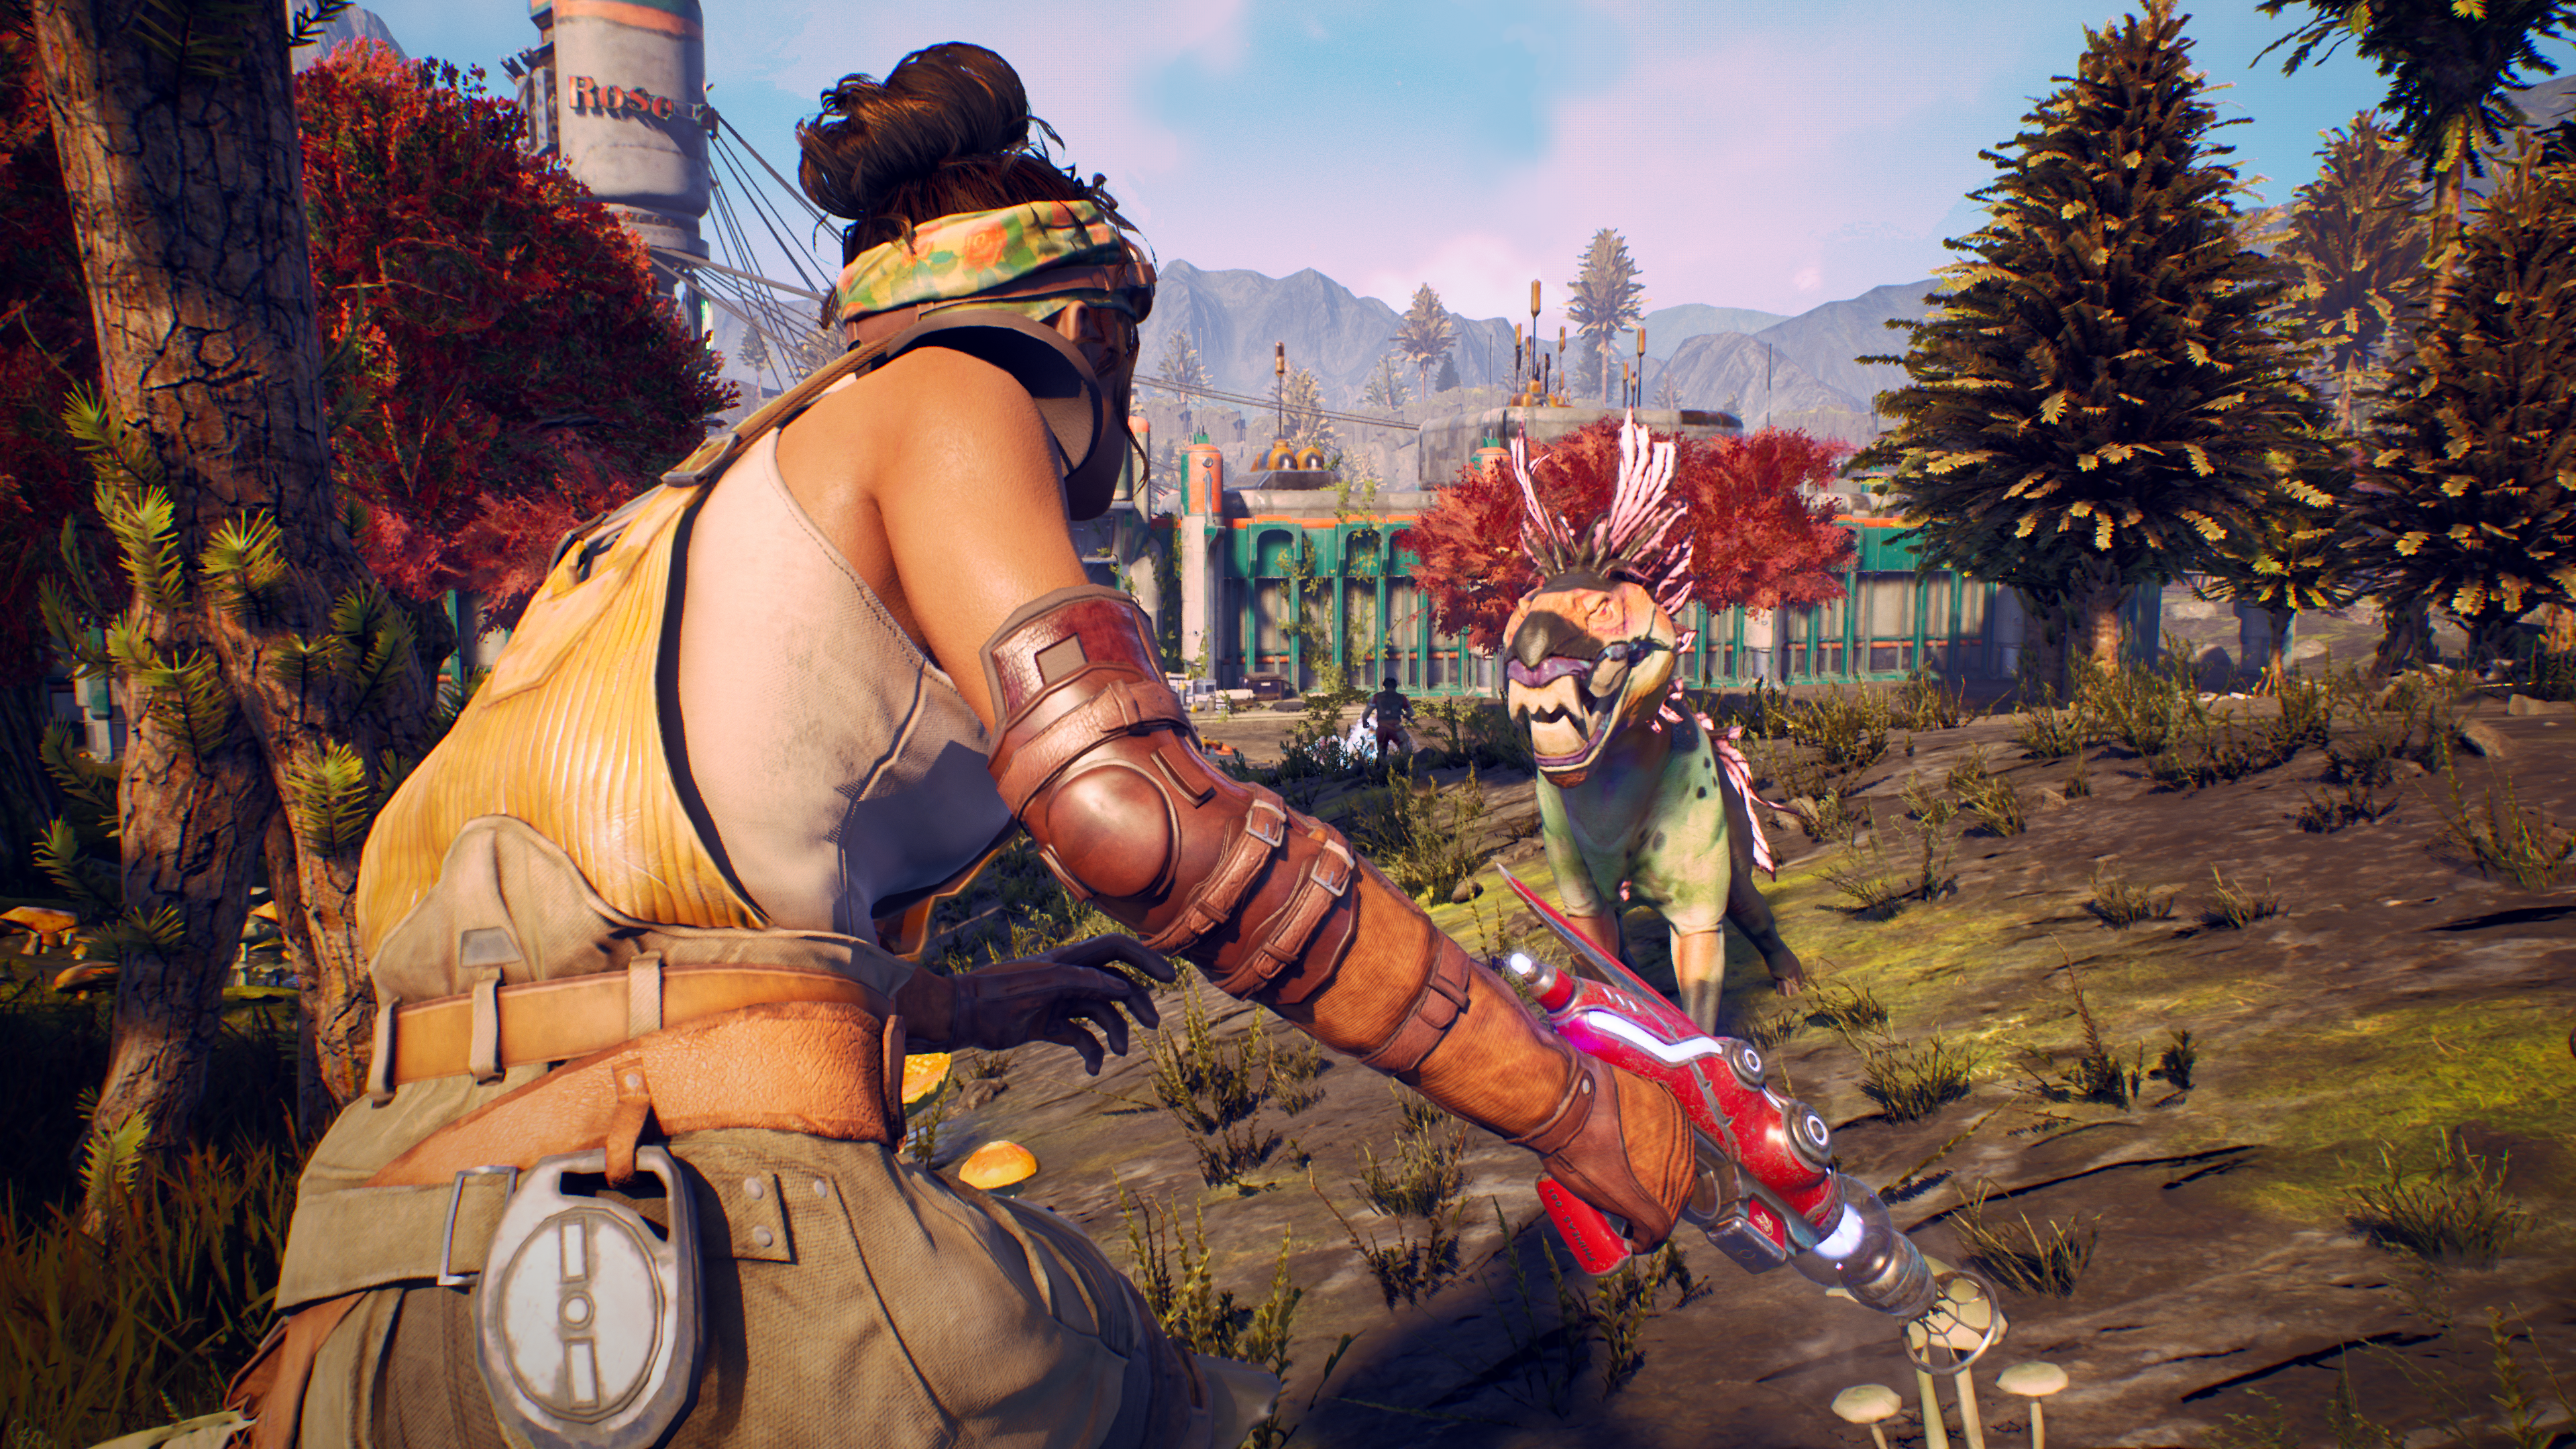 Image for Microsoft sees exclusive franchise potential in The Outer Worlds